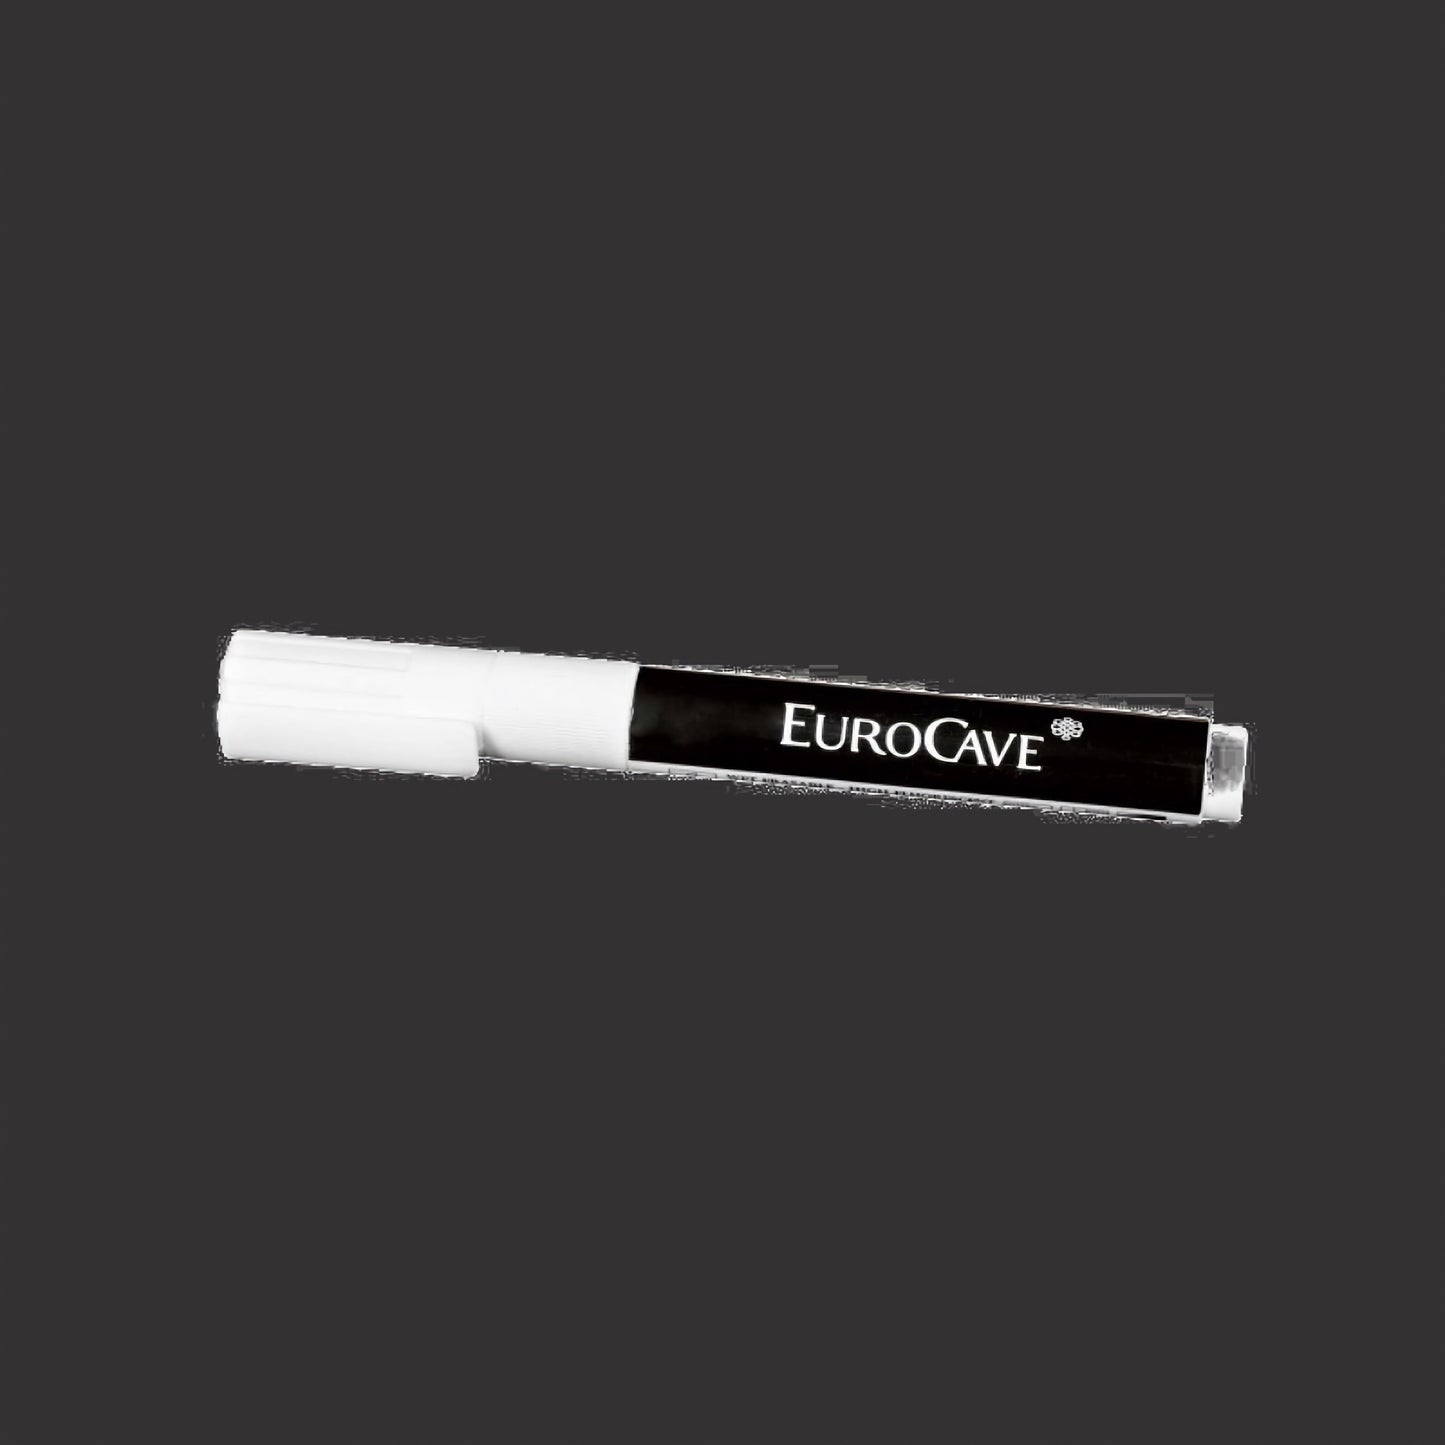 Erasable white marker pen for EuroCave identification systems